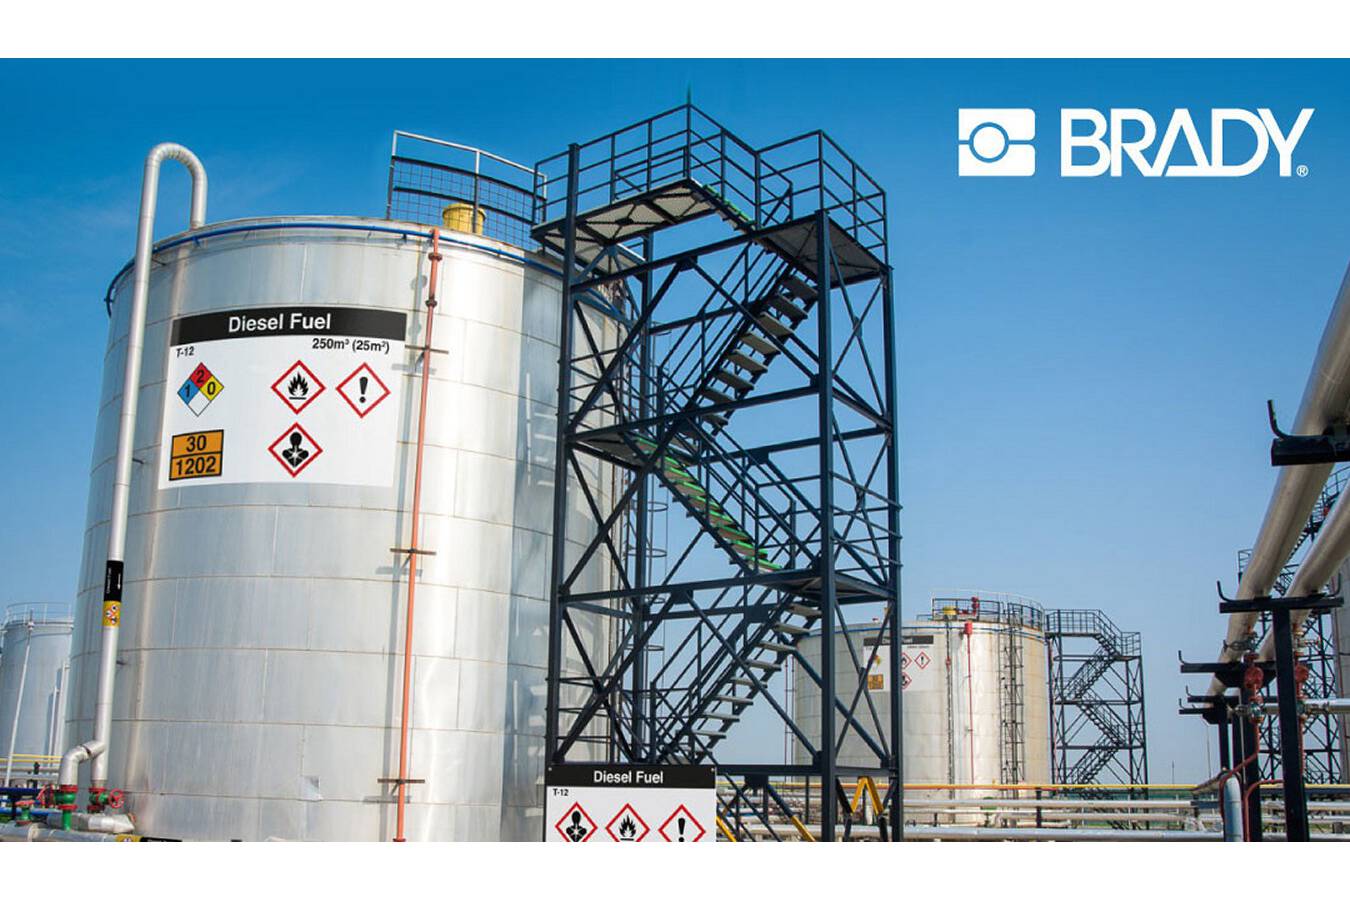 Increase safety and efficiency with reliable ISO 20560 tank markers ISO 20560 is the first standard to provide internationally accepted rules on how and where to identify tanks. Brady provides clear marker layouts that are easily legible and understandable.